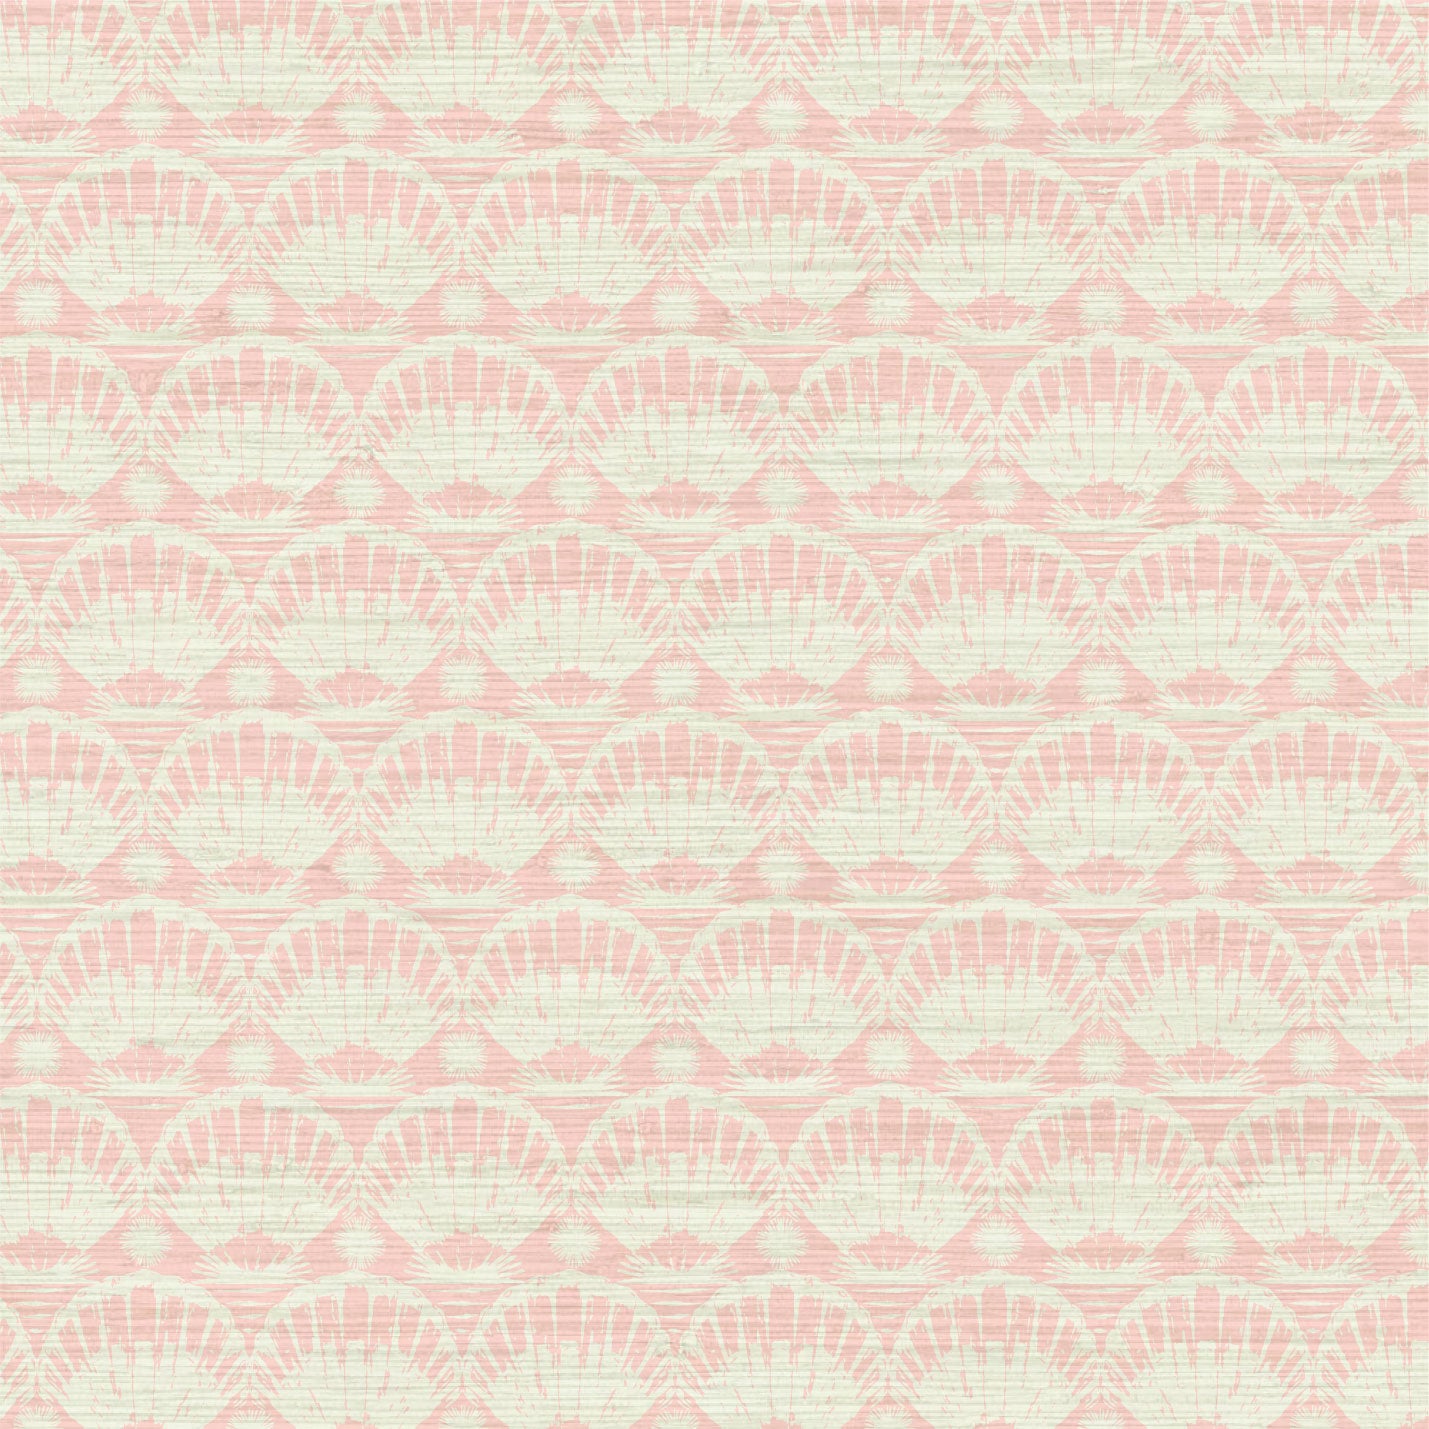 Load image into Gallery viewer, printed grasscloth wallpaper seashell horizontal stripe Natural Textured Eco-Friendly Non-toxic High-quality  Sustainable practices Sustainability Interior Design Wall covering custom tailor-made retro chic tropical bespoke nature Seaside Coastal Seashore Waterfront Vacation home styling Retreat Relaxed beach vibes Beach cottage Shoreline Oceanfront Nautical pastel pink and white baby 
